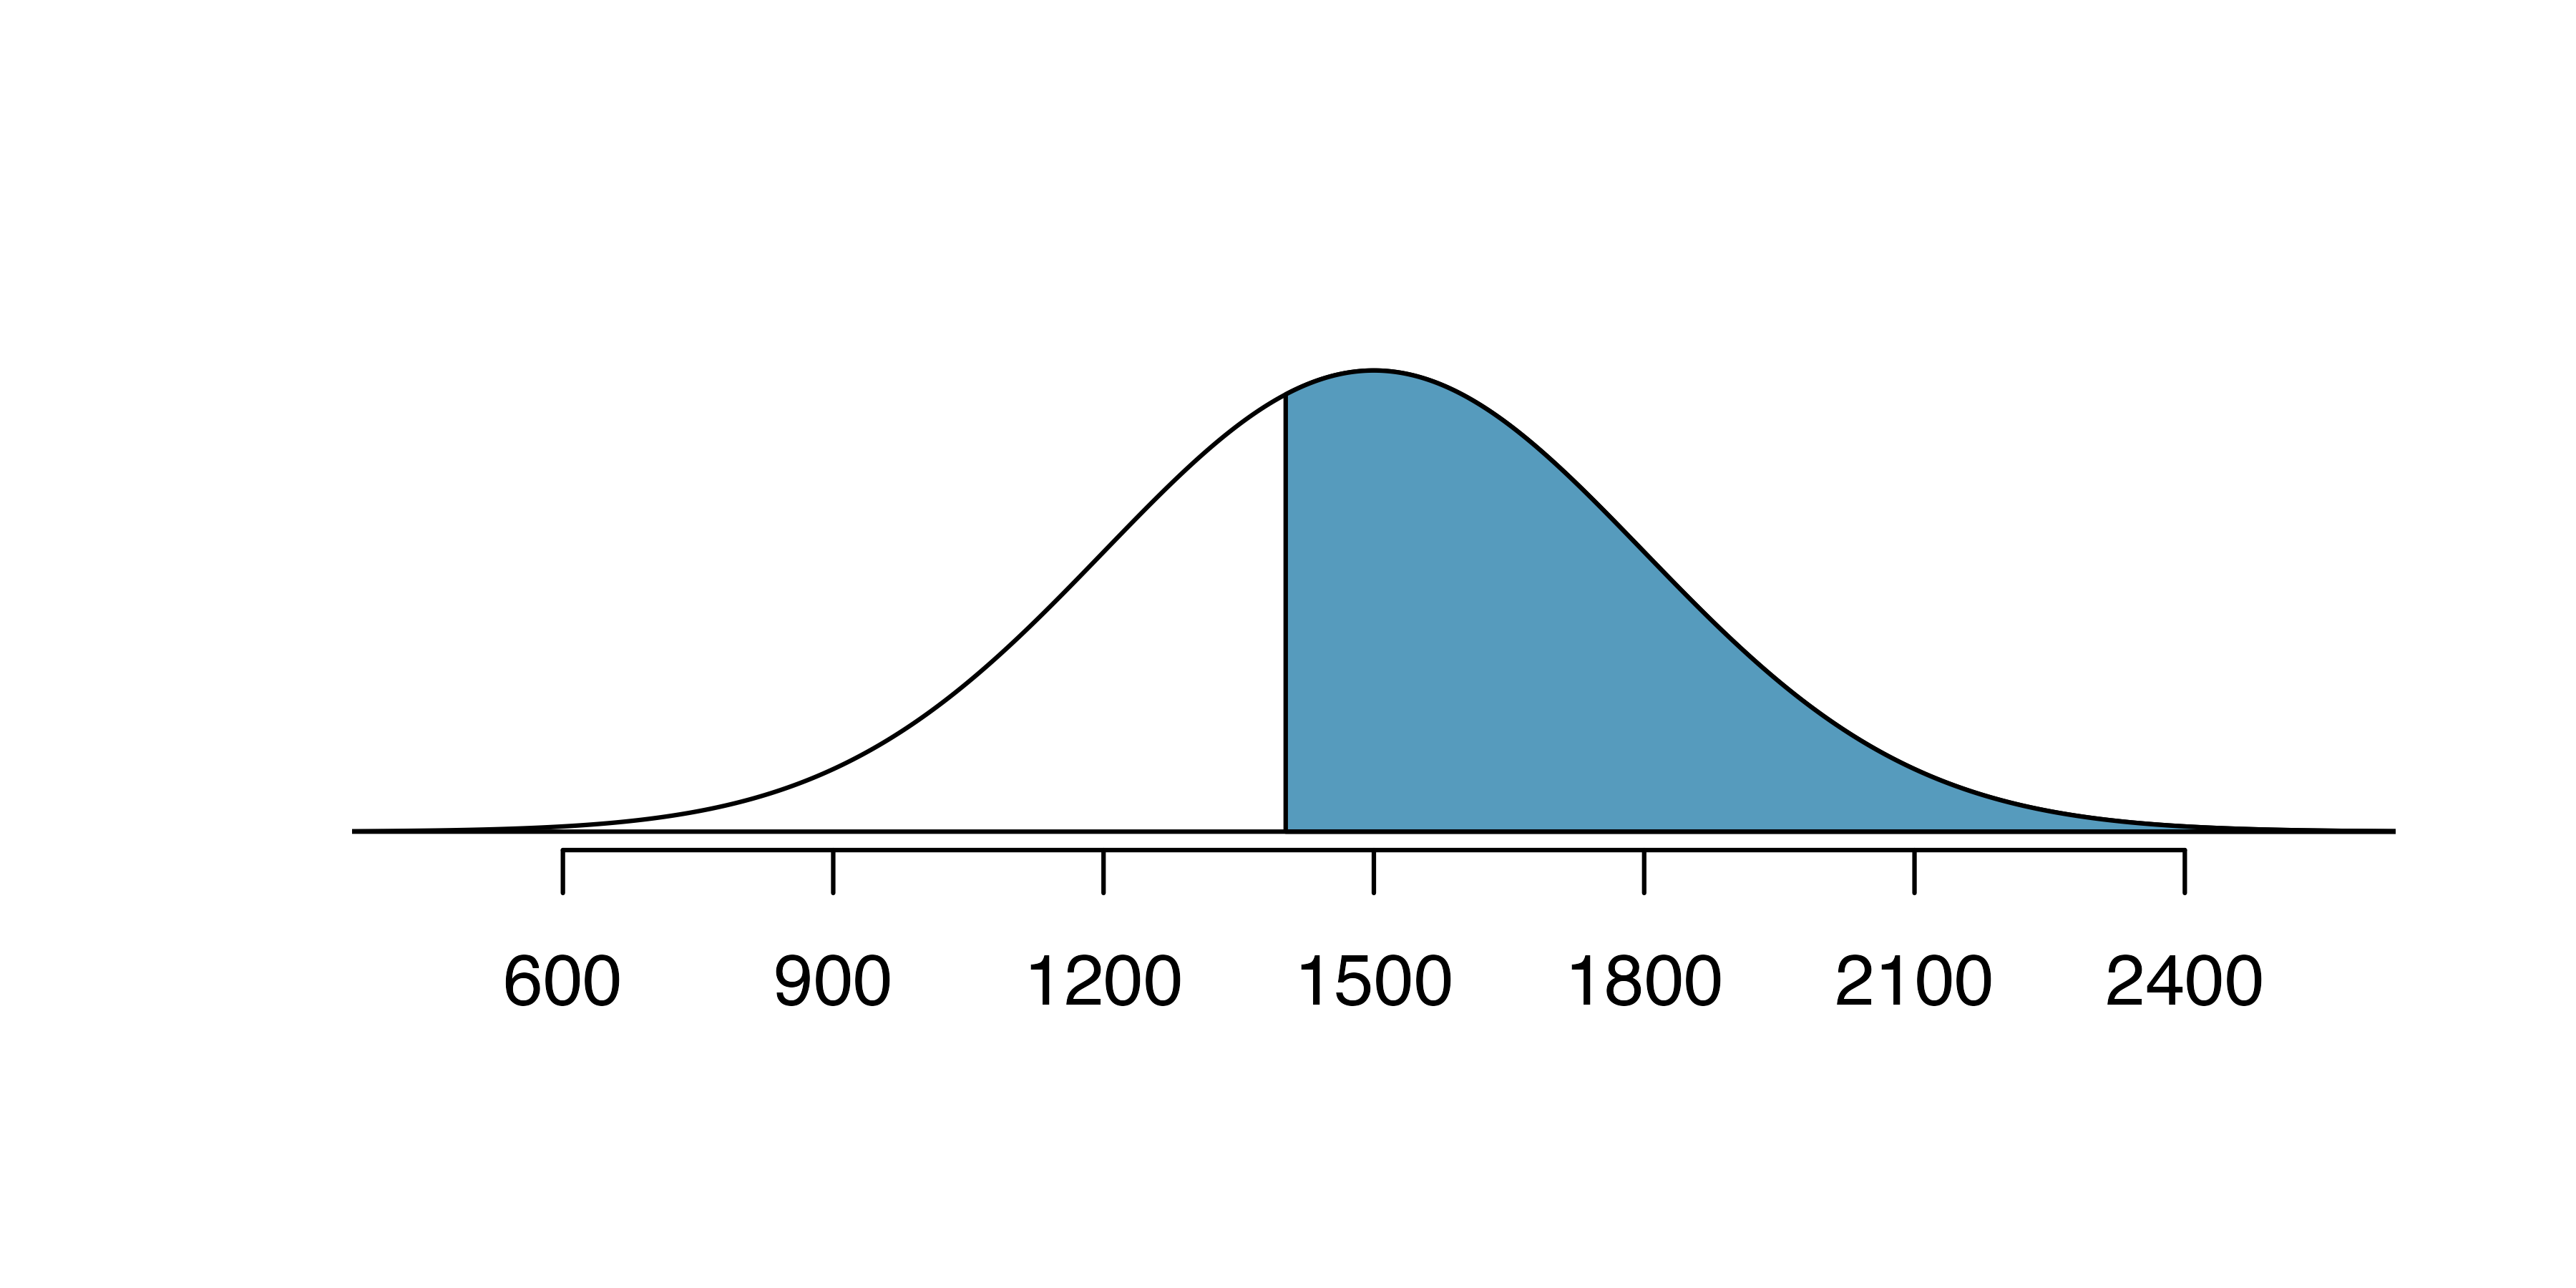 A normal curve with a mean of 1500 and a standard deviation of 300.  Values greater than 1400 are shaded blue in the upper part of the curve. The shaded part is roughly 63 percent of the graph.